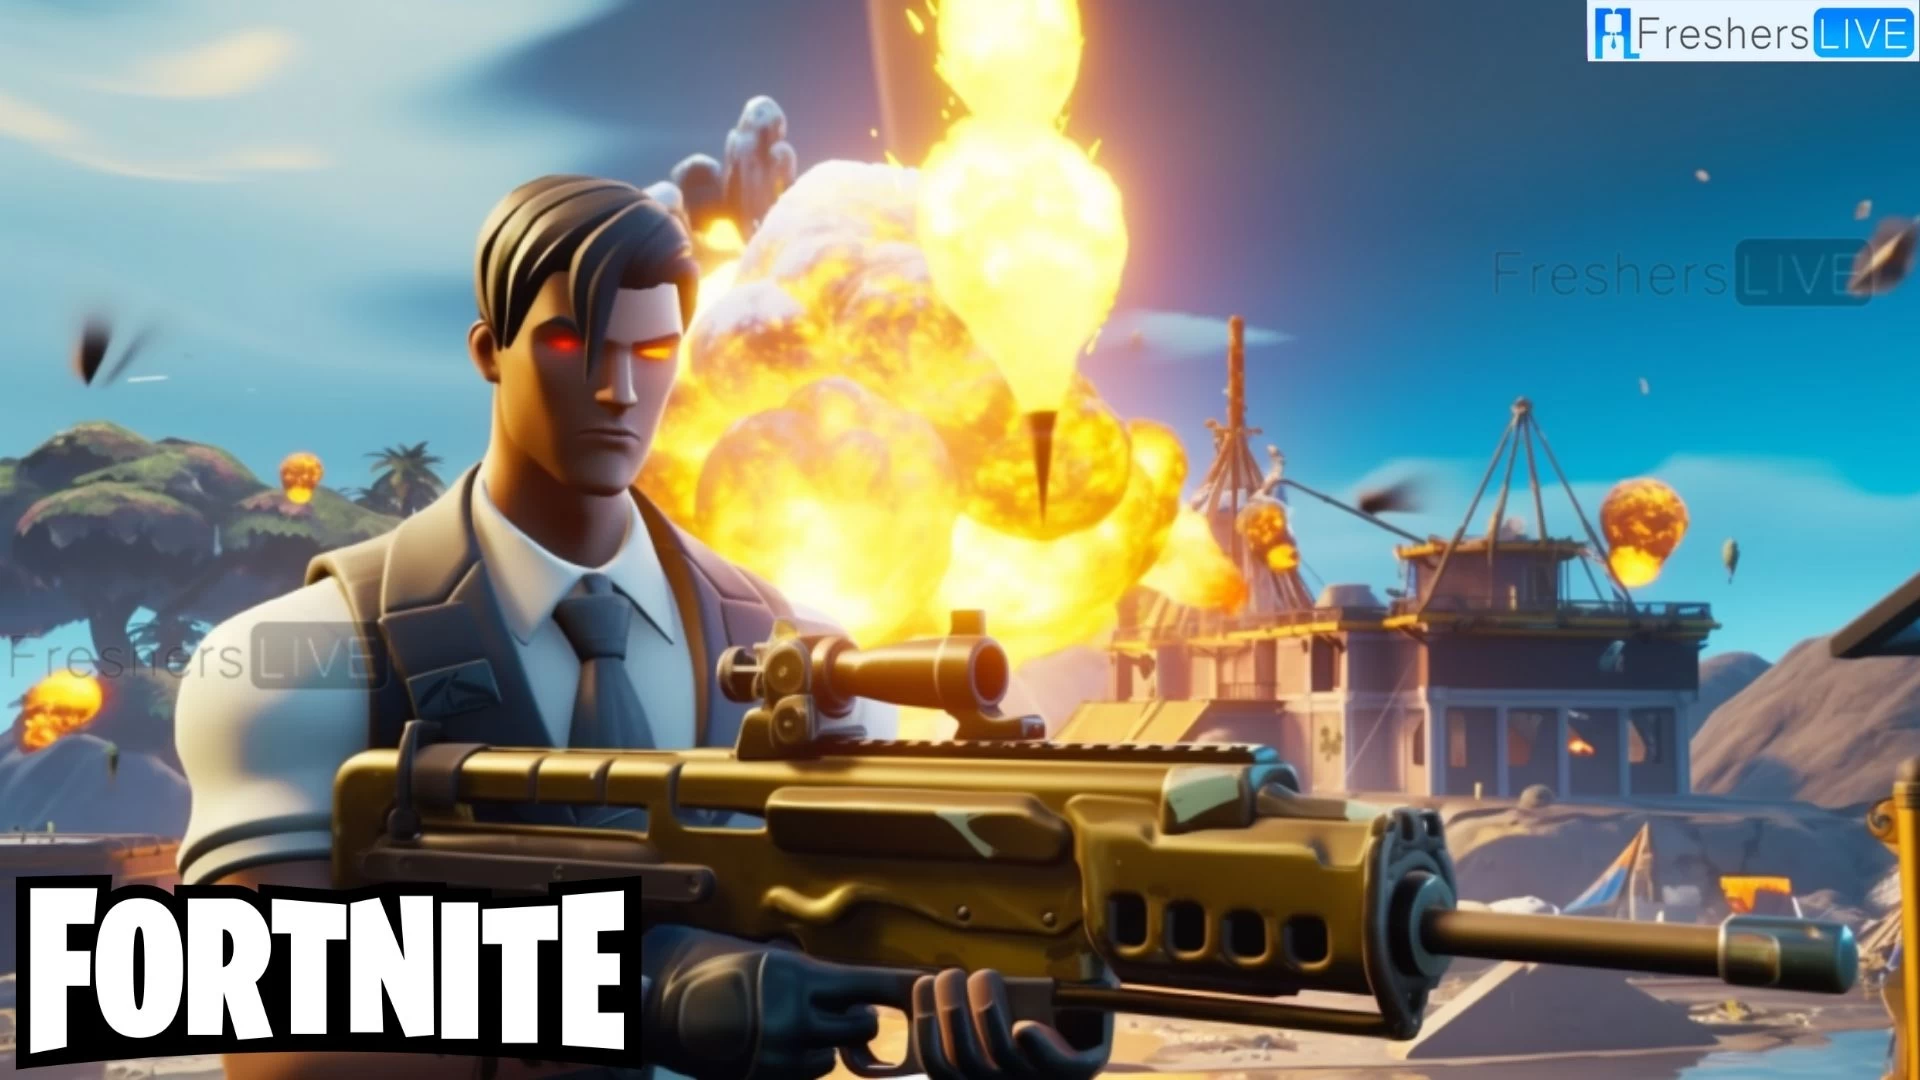 Does Fortnite Have Skill Based Matchmaking? How Many Downloads Does Fortnite Have? Does Fortnite Have Split Screen?